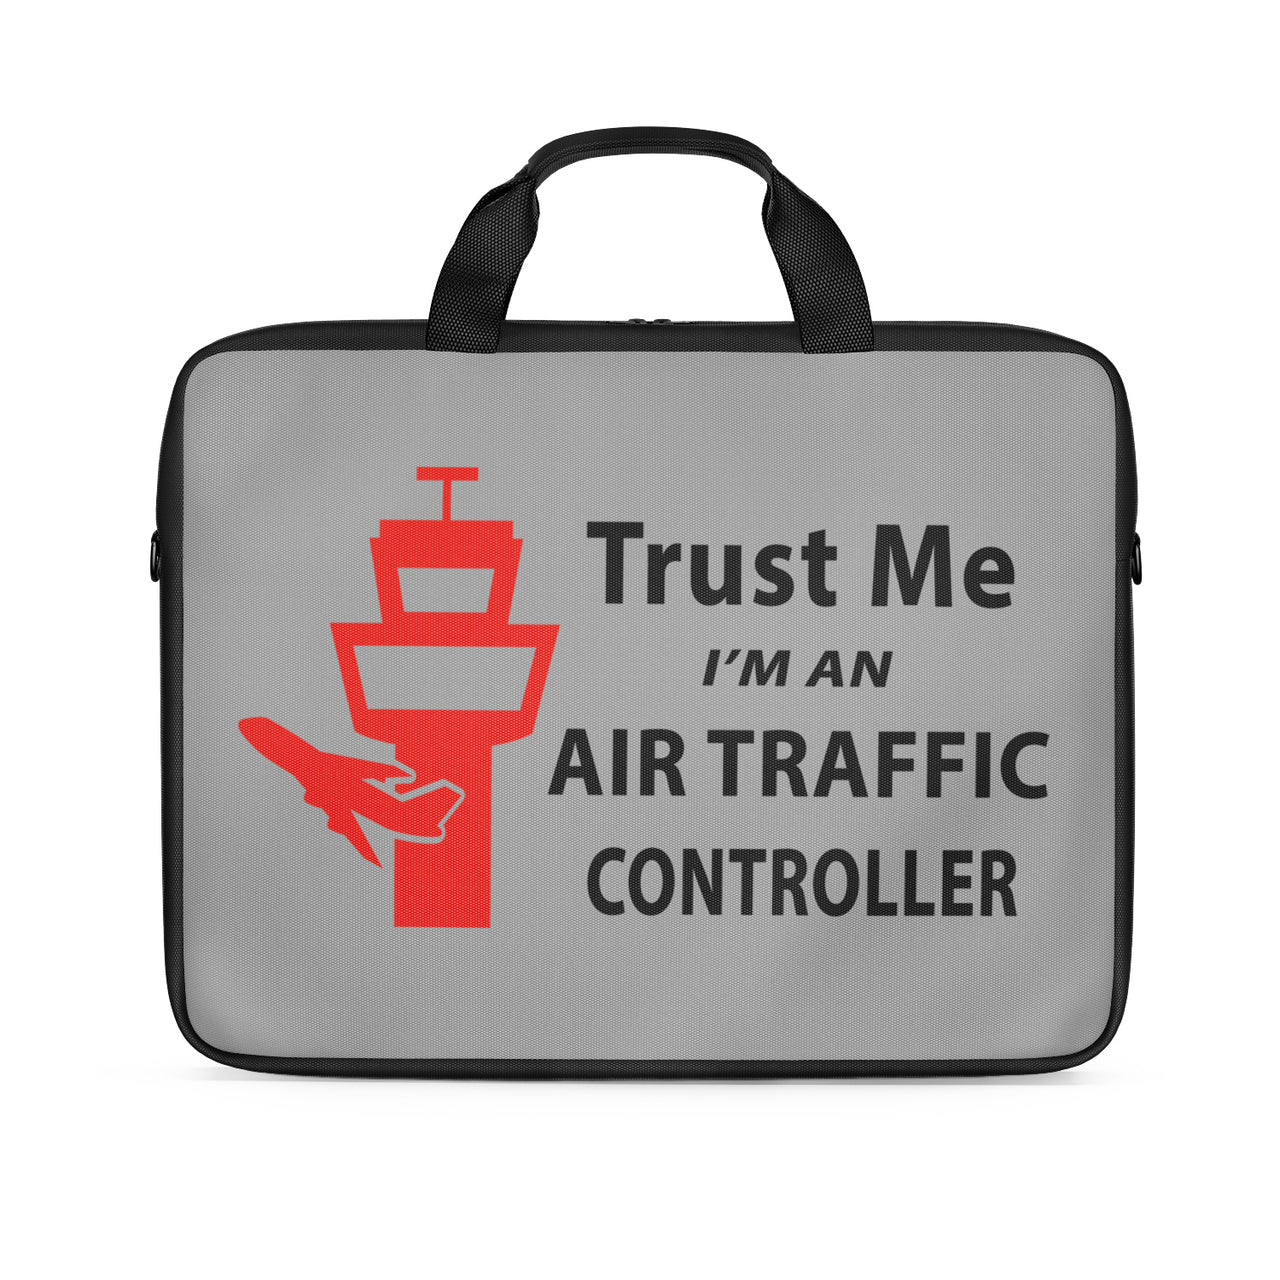 Trust Me I'm an Air Traffic Controller Designed Laptop & Tablet Bags